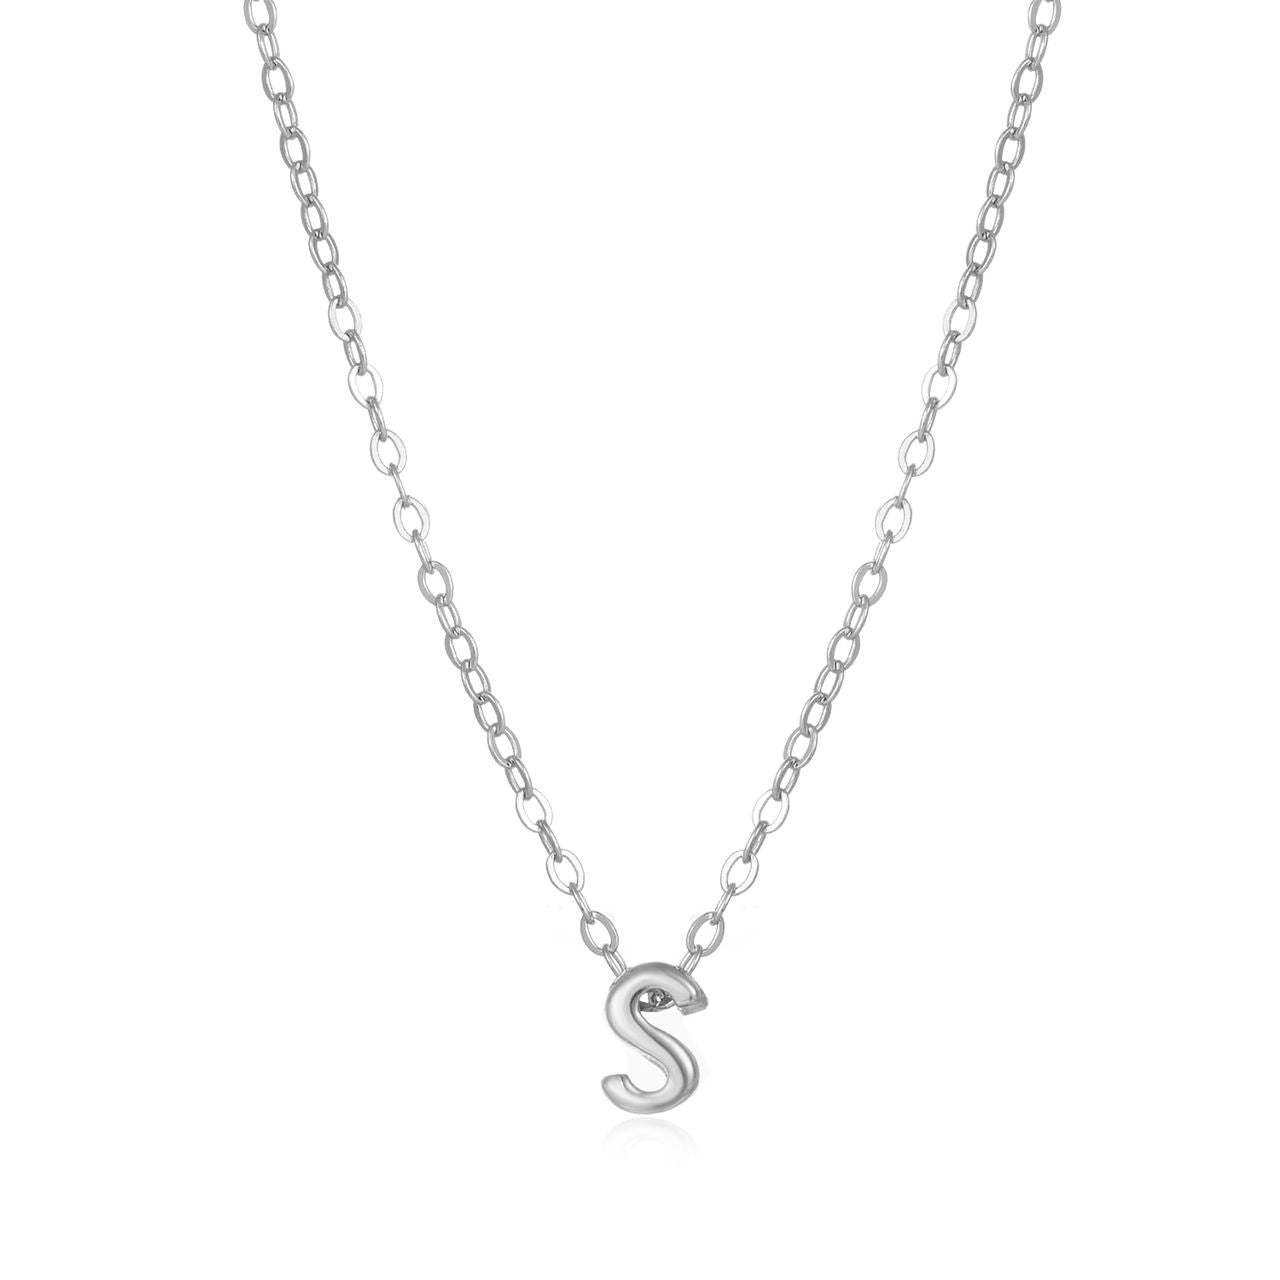 Sterling silver necklace with a petite initial S charm